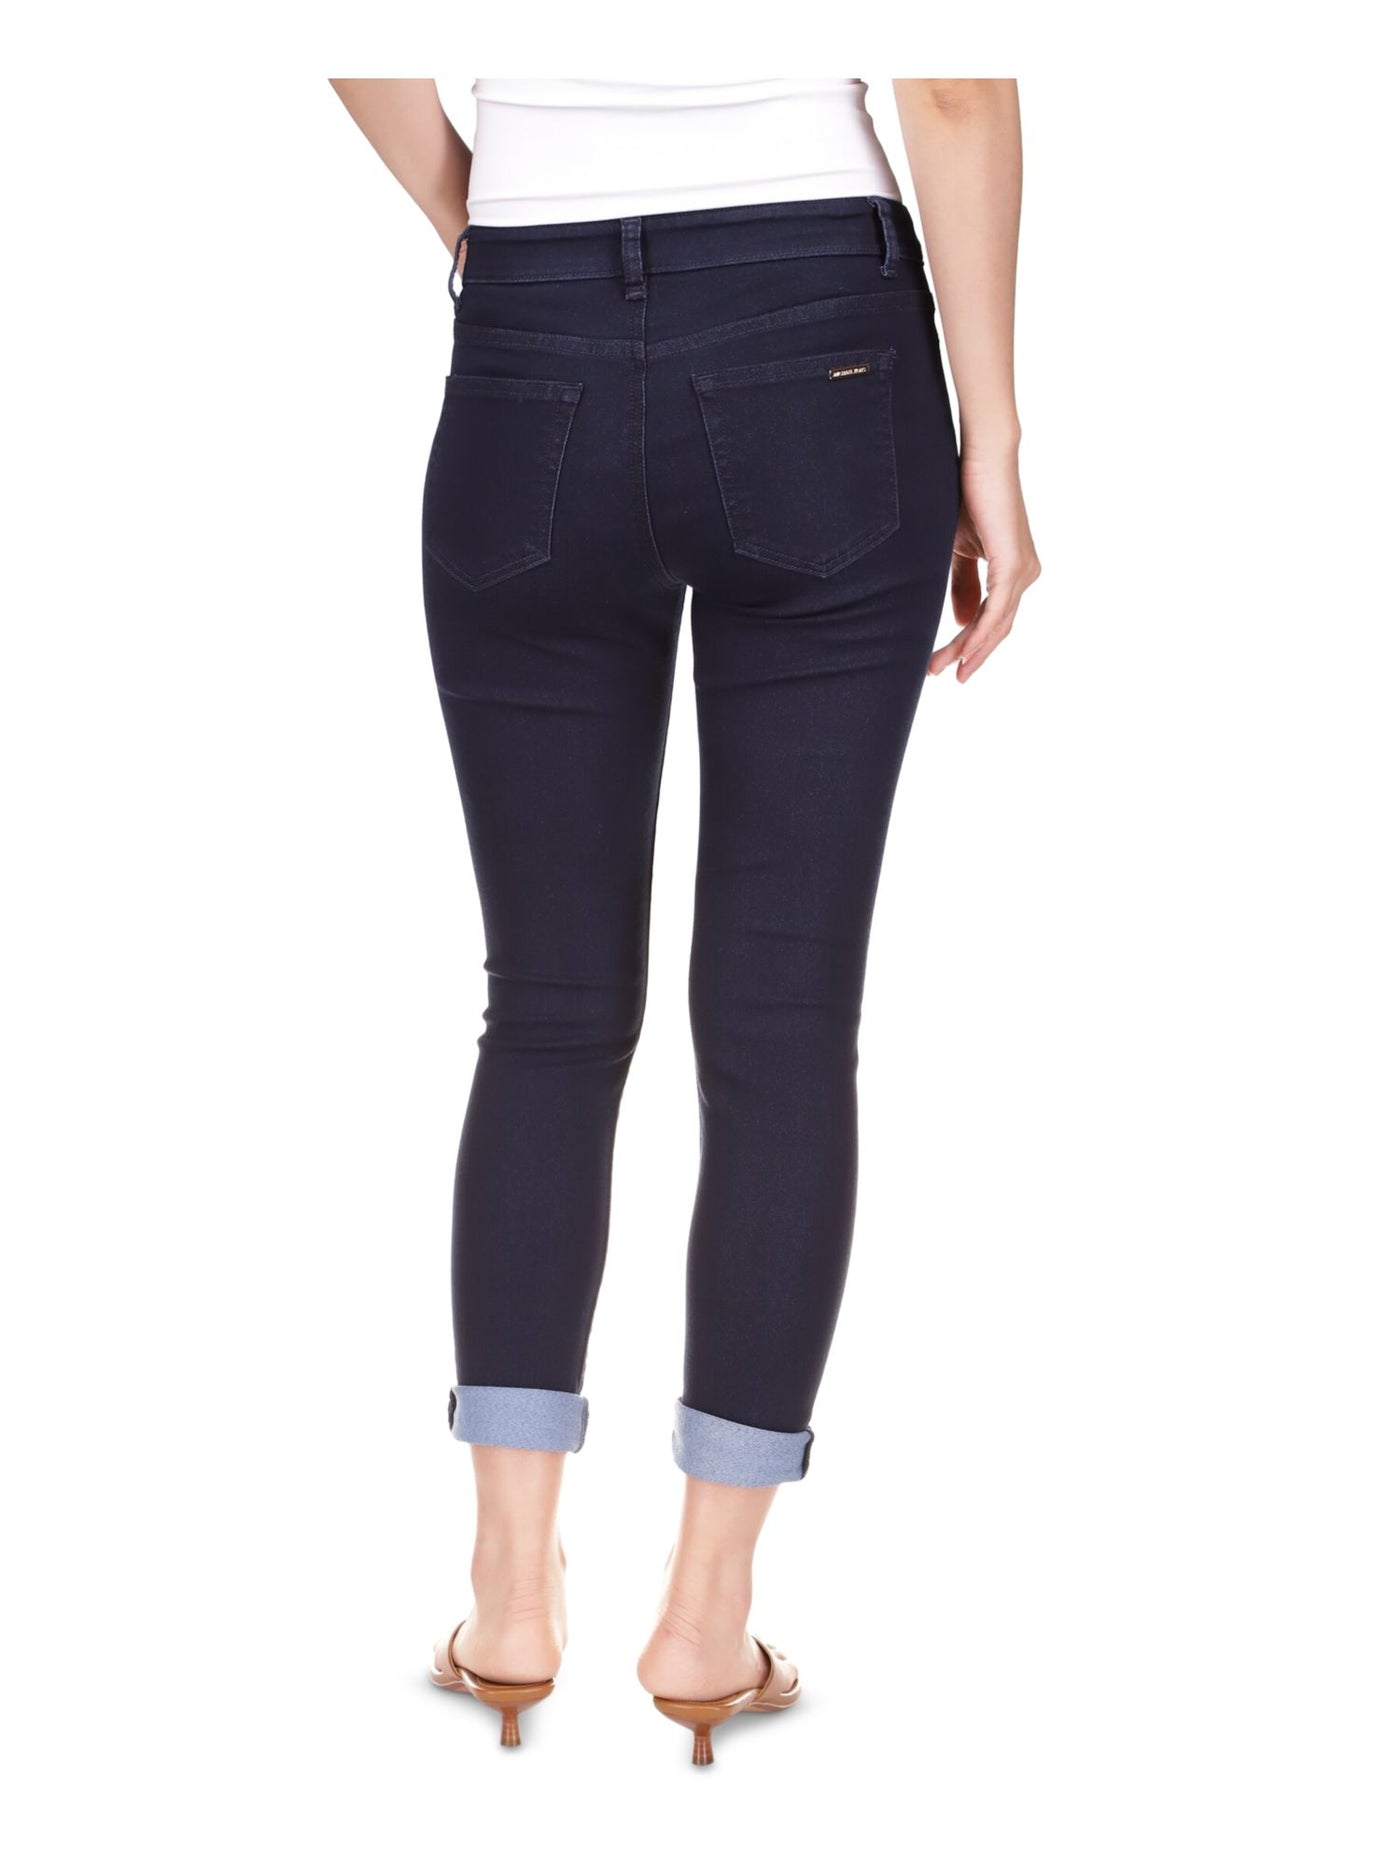 MICHAEL MICHAEL KORS Womens Navy Denim Pocketed Rolled Hem Button Fly Skinny Jeans Petites 6P